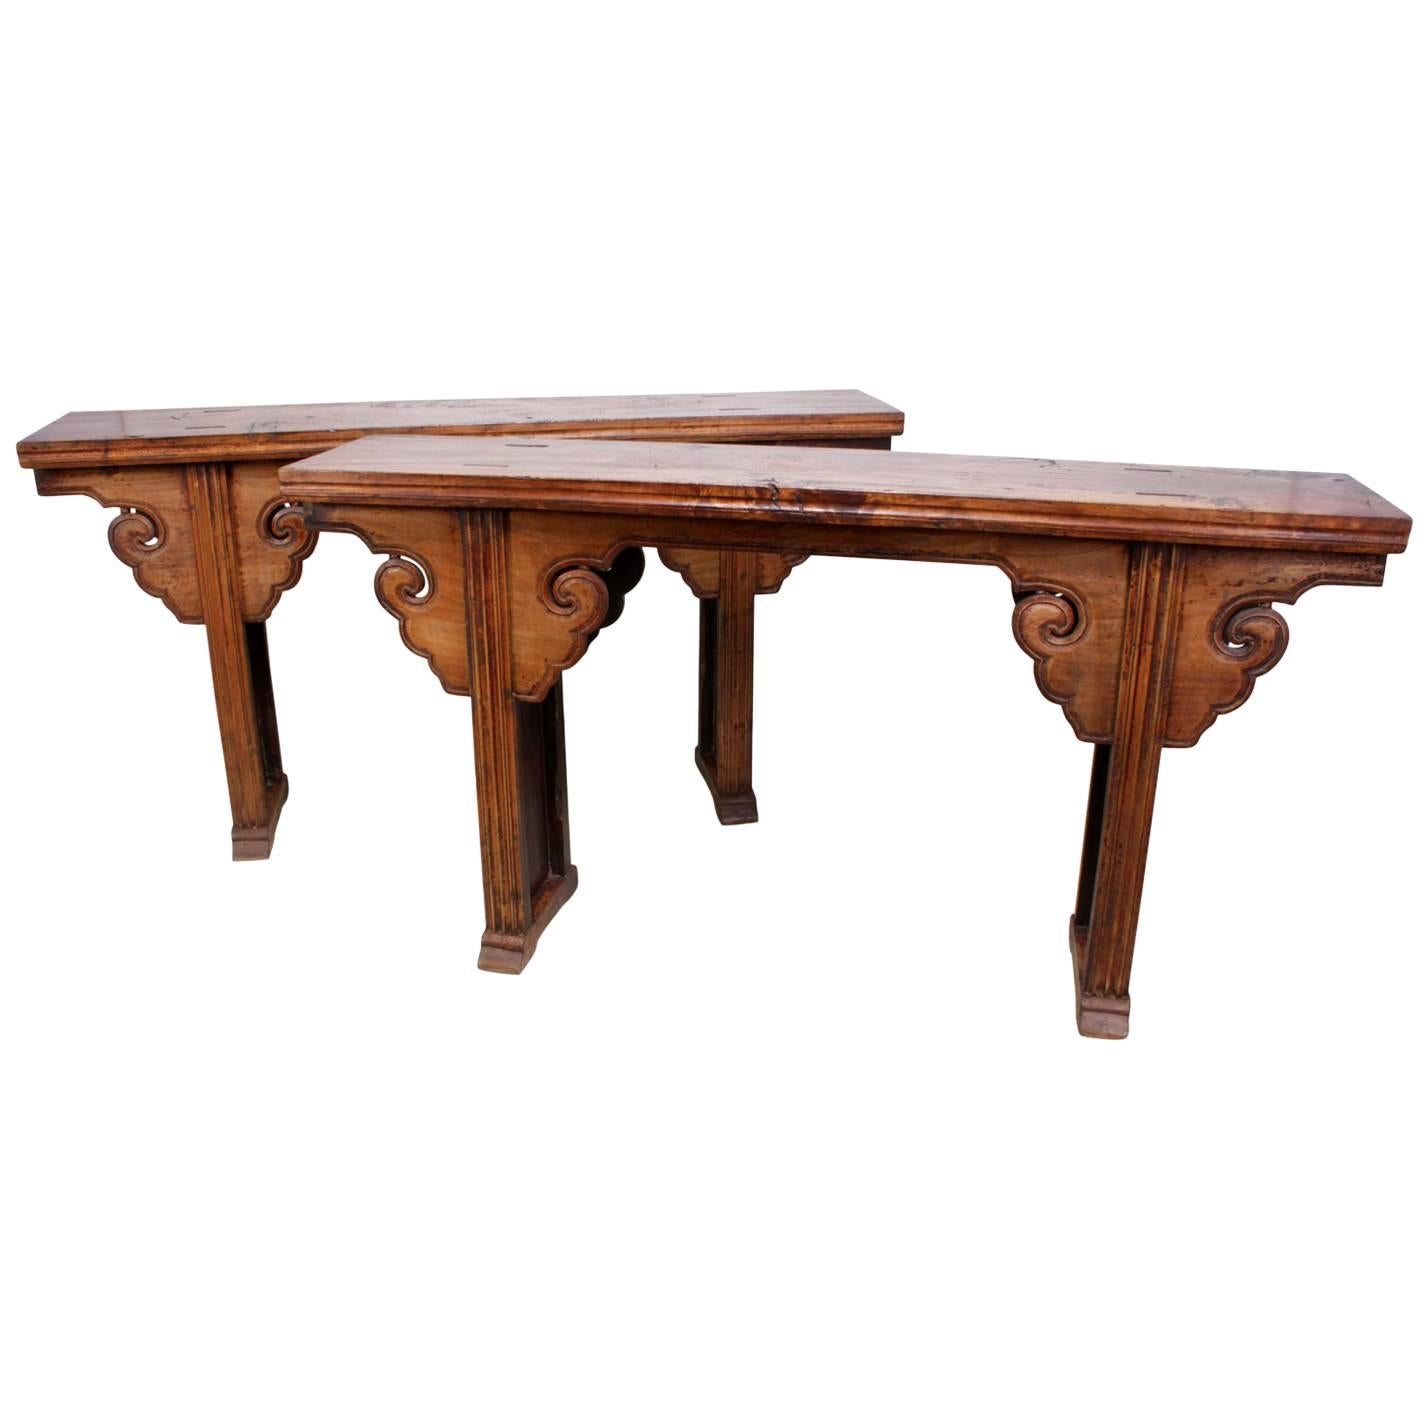 Pair of Elm Alter Tables from Northern China, circa 1820